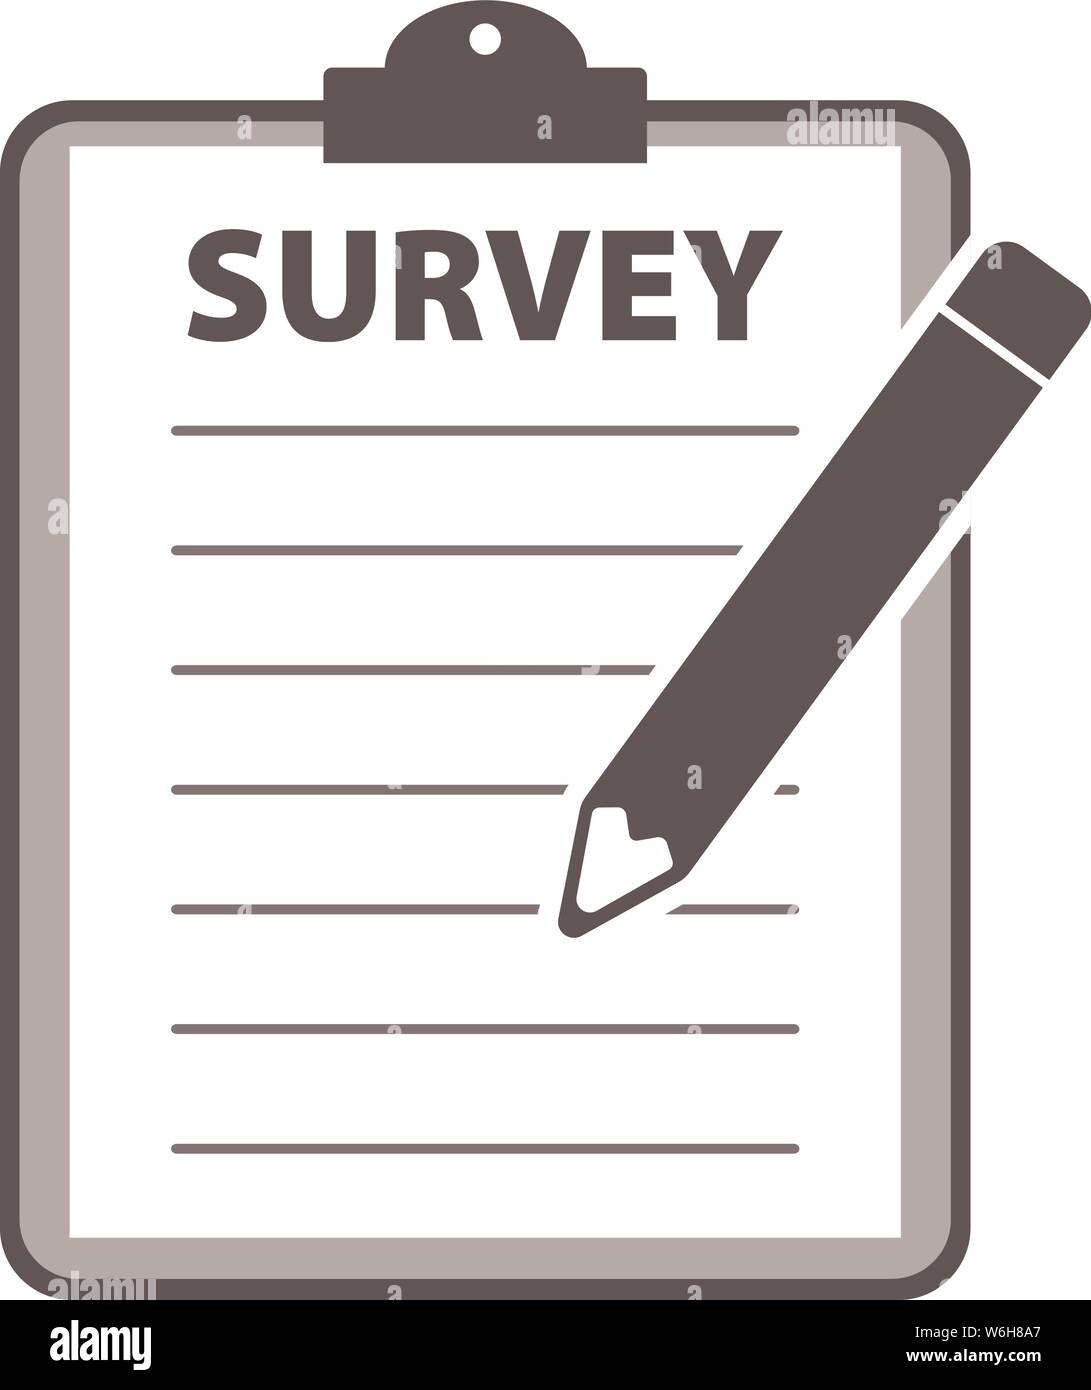 simple flat survey icon with clipboard and pencil vector illustration Stock Vector